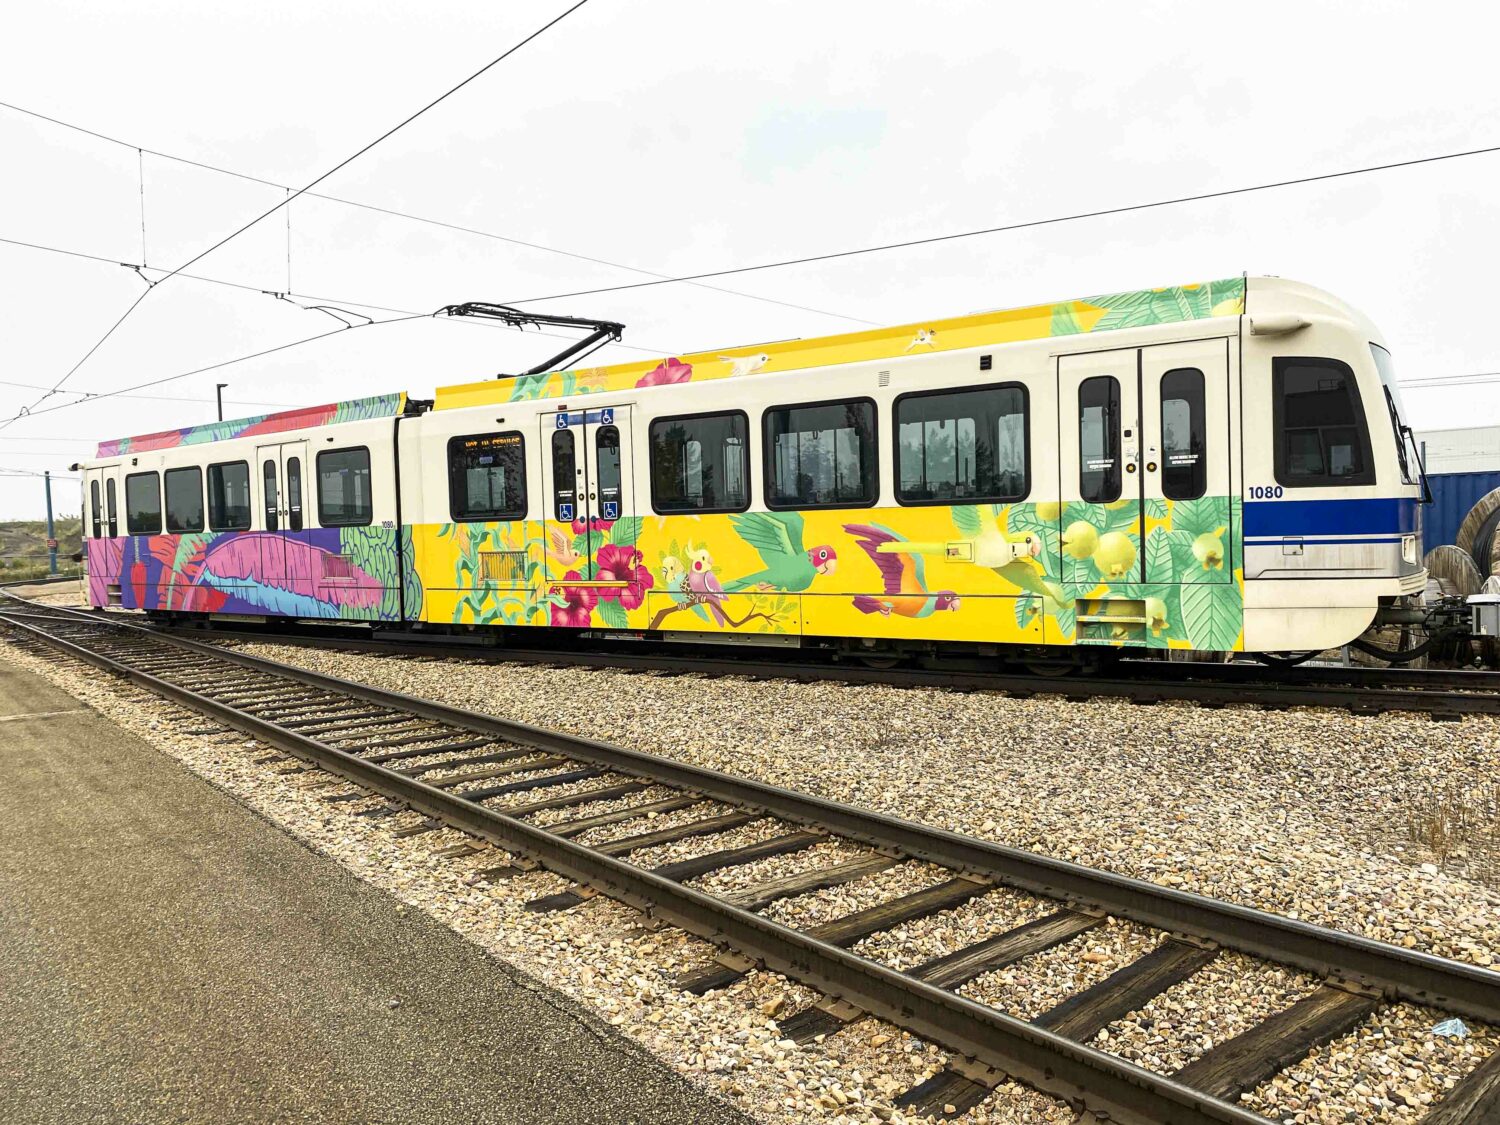 A photo of an Edmonton LRT with artwork by Michelle and Roger featuring illustrations of birds, foliage, corn stalks, tree branches, plantain plants and bunches.